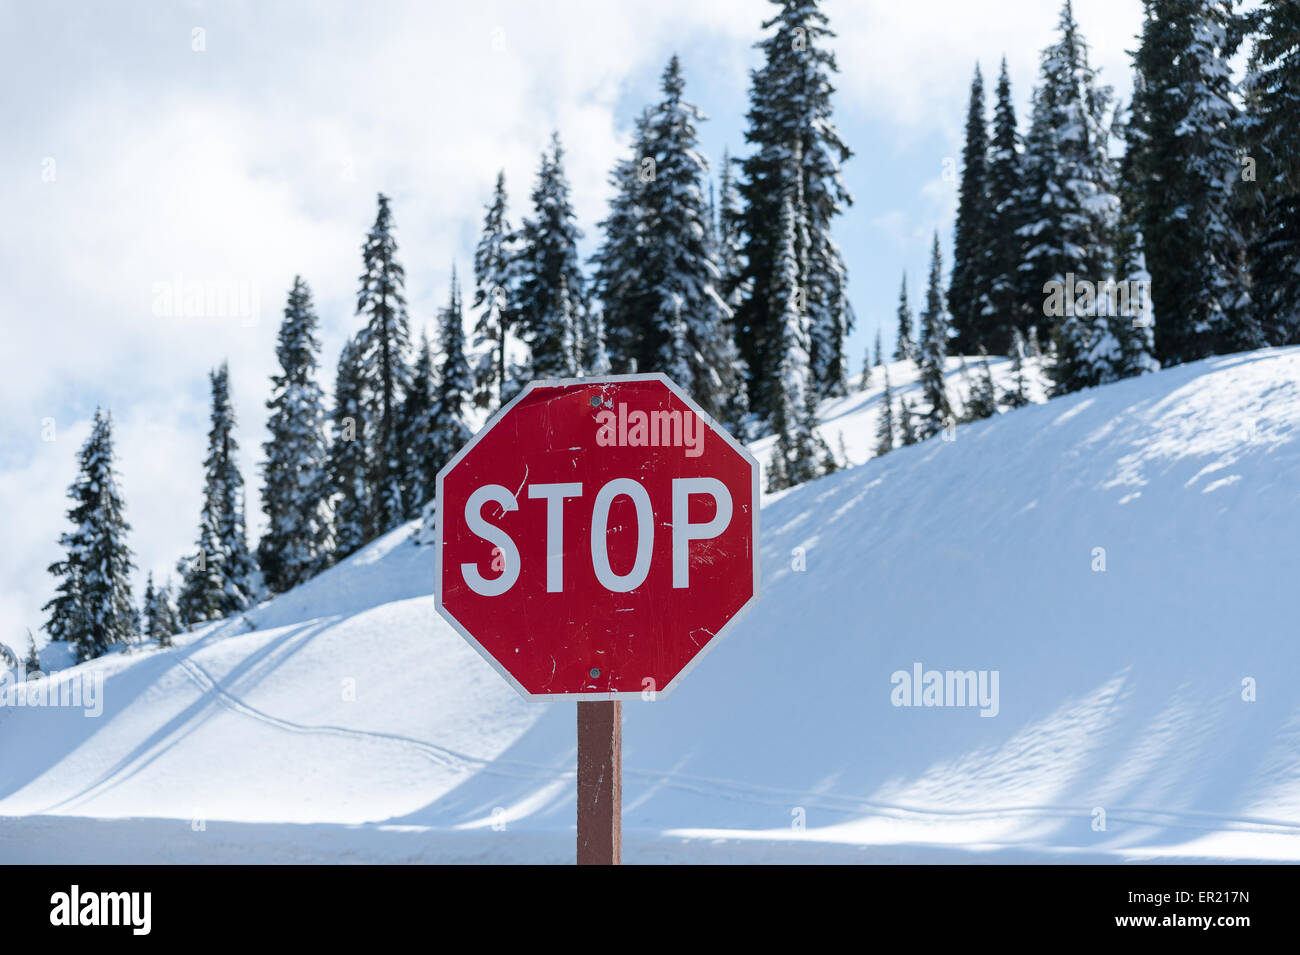 Red stop sign against a snow bank in the mountains with evergreen trees ...